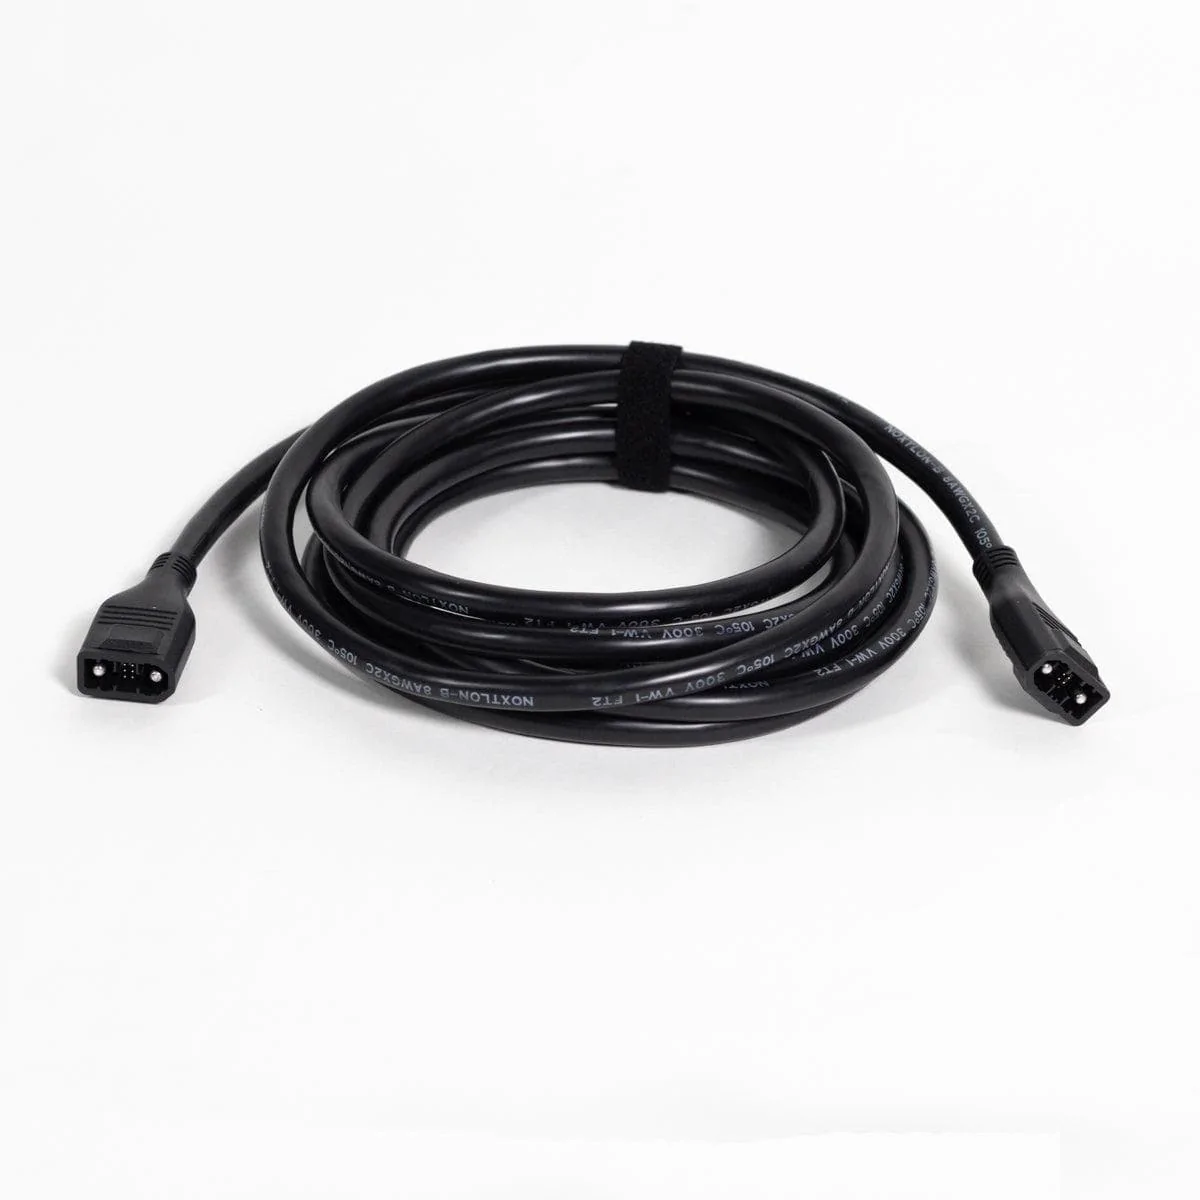 An EcoFlow black power cable for a computer.